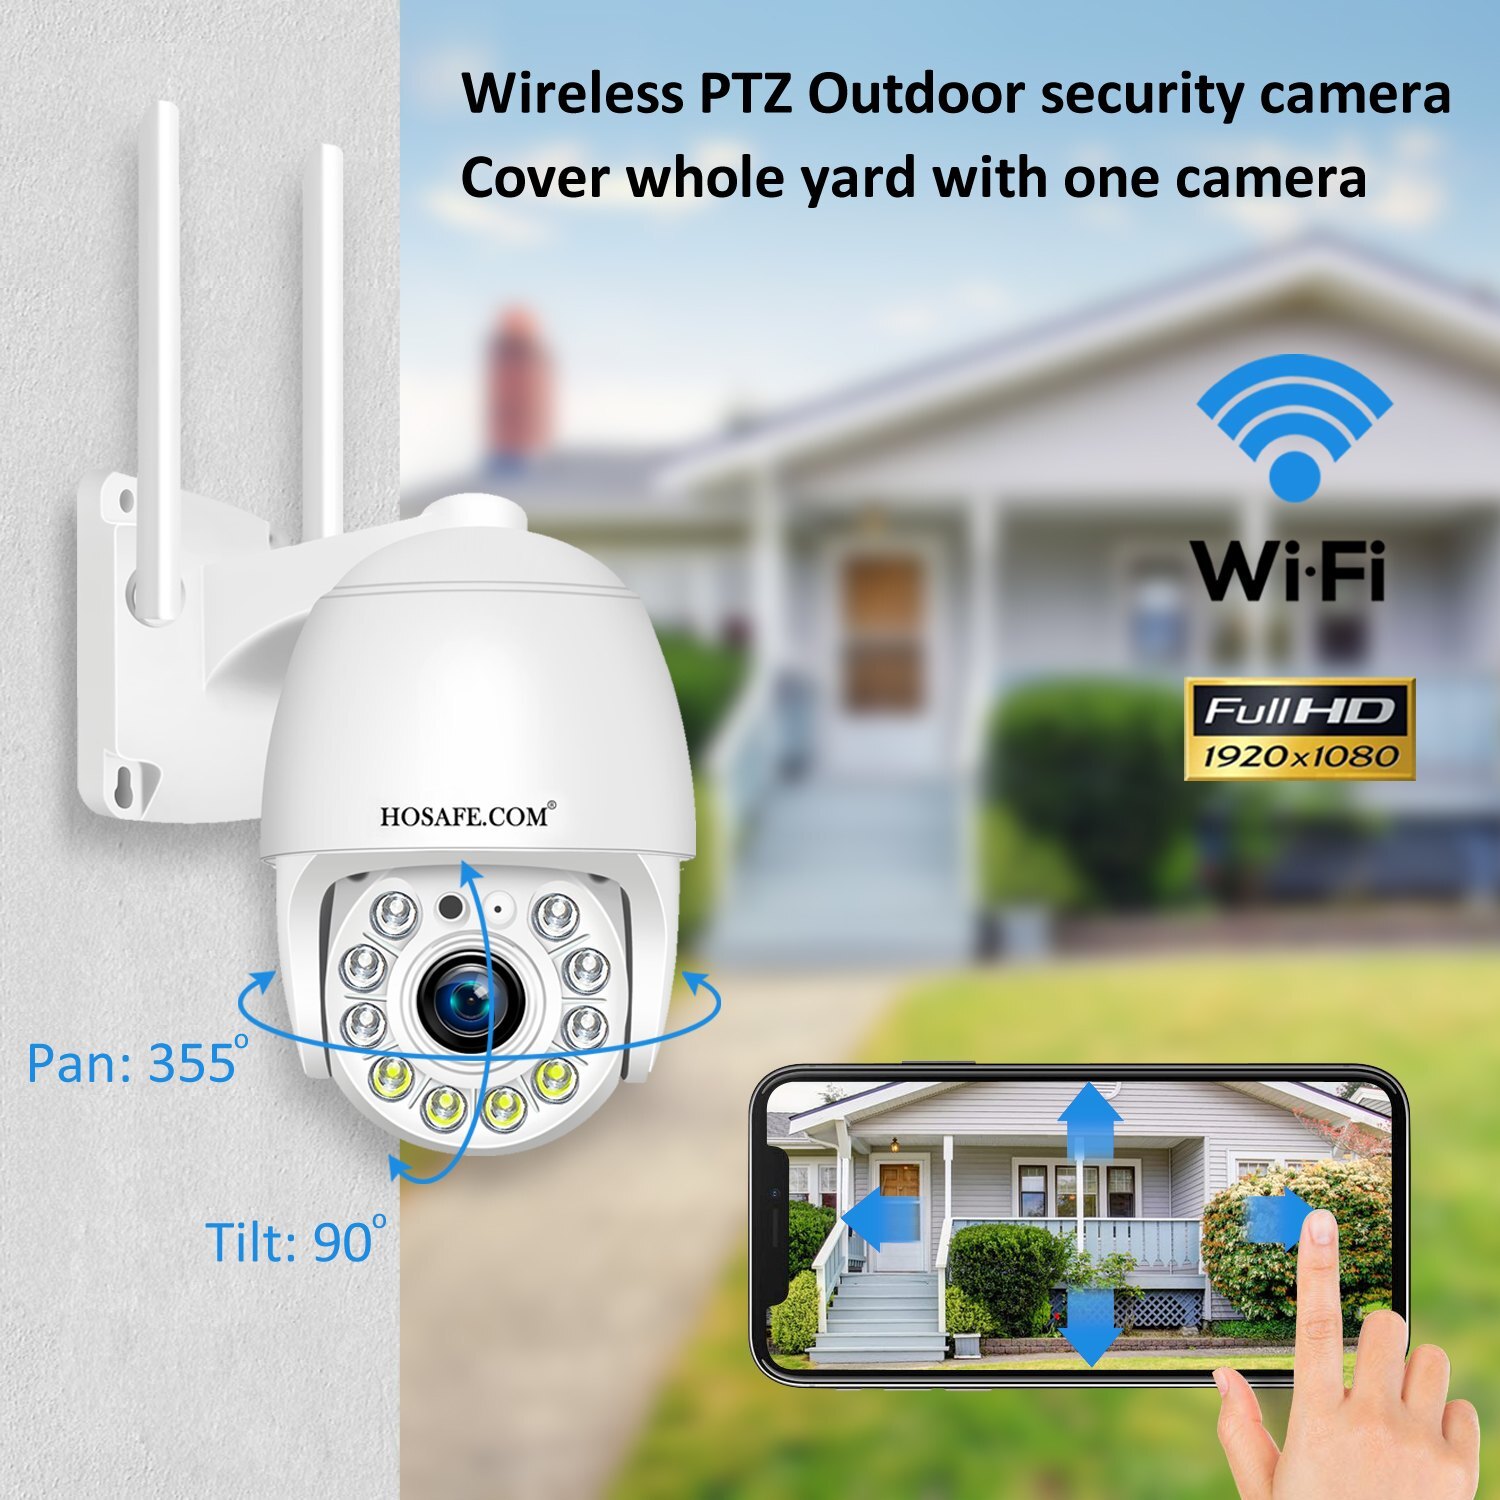 Night Vision ONVIF IP Camera 5 Megapixel IP Security Camera with Audio Motion Detection HOSAFE POE Camera Built-in SD Slot Outdoor Indoor Waterproof POE Security Camera System 